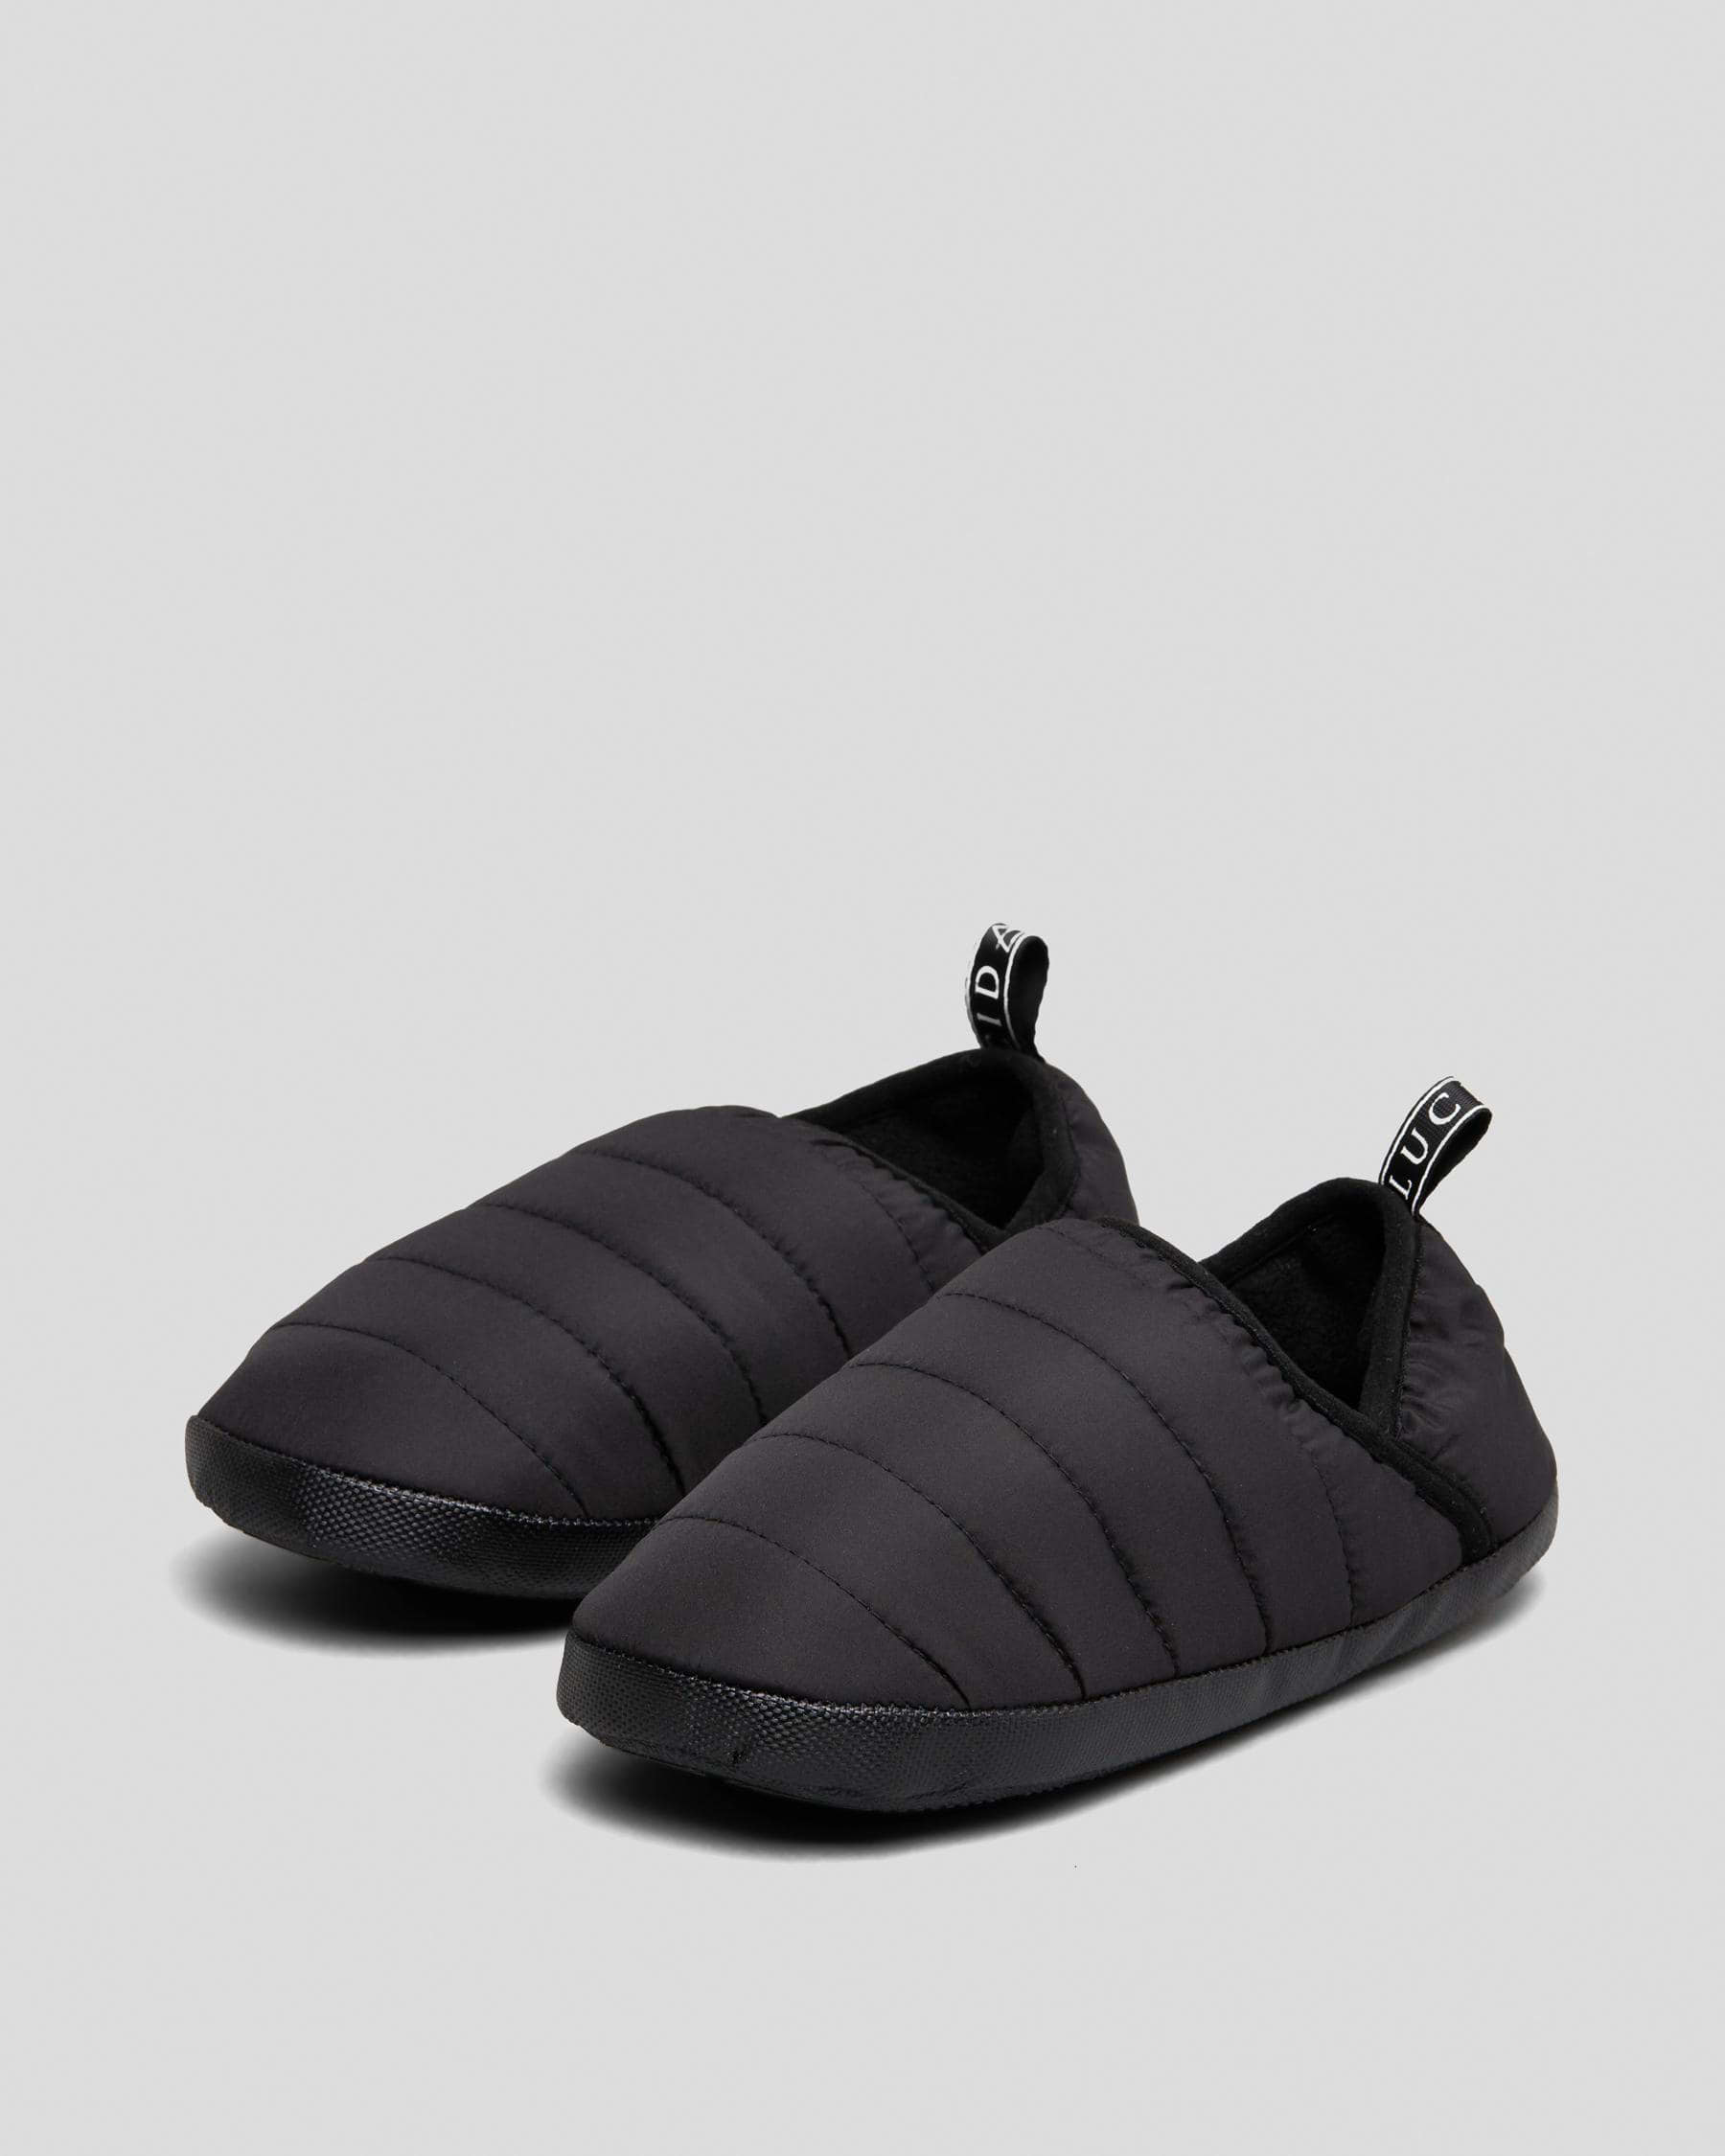 Lucid Puffer Mule Slippers In Black/black/white - FREE* Shipping & Easy ...